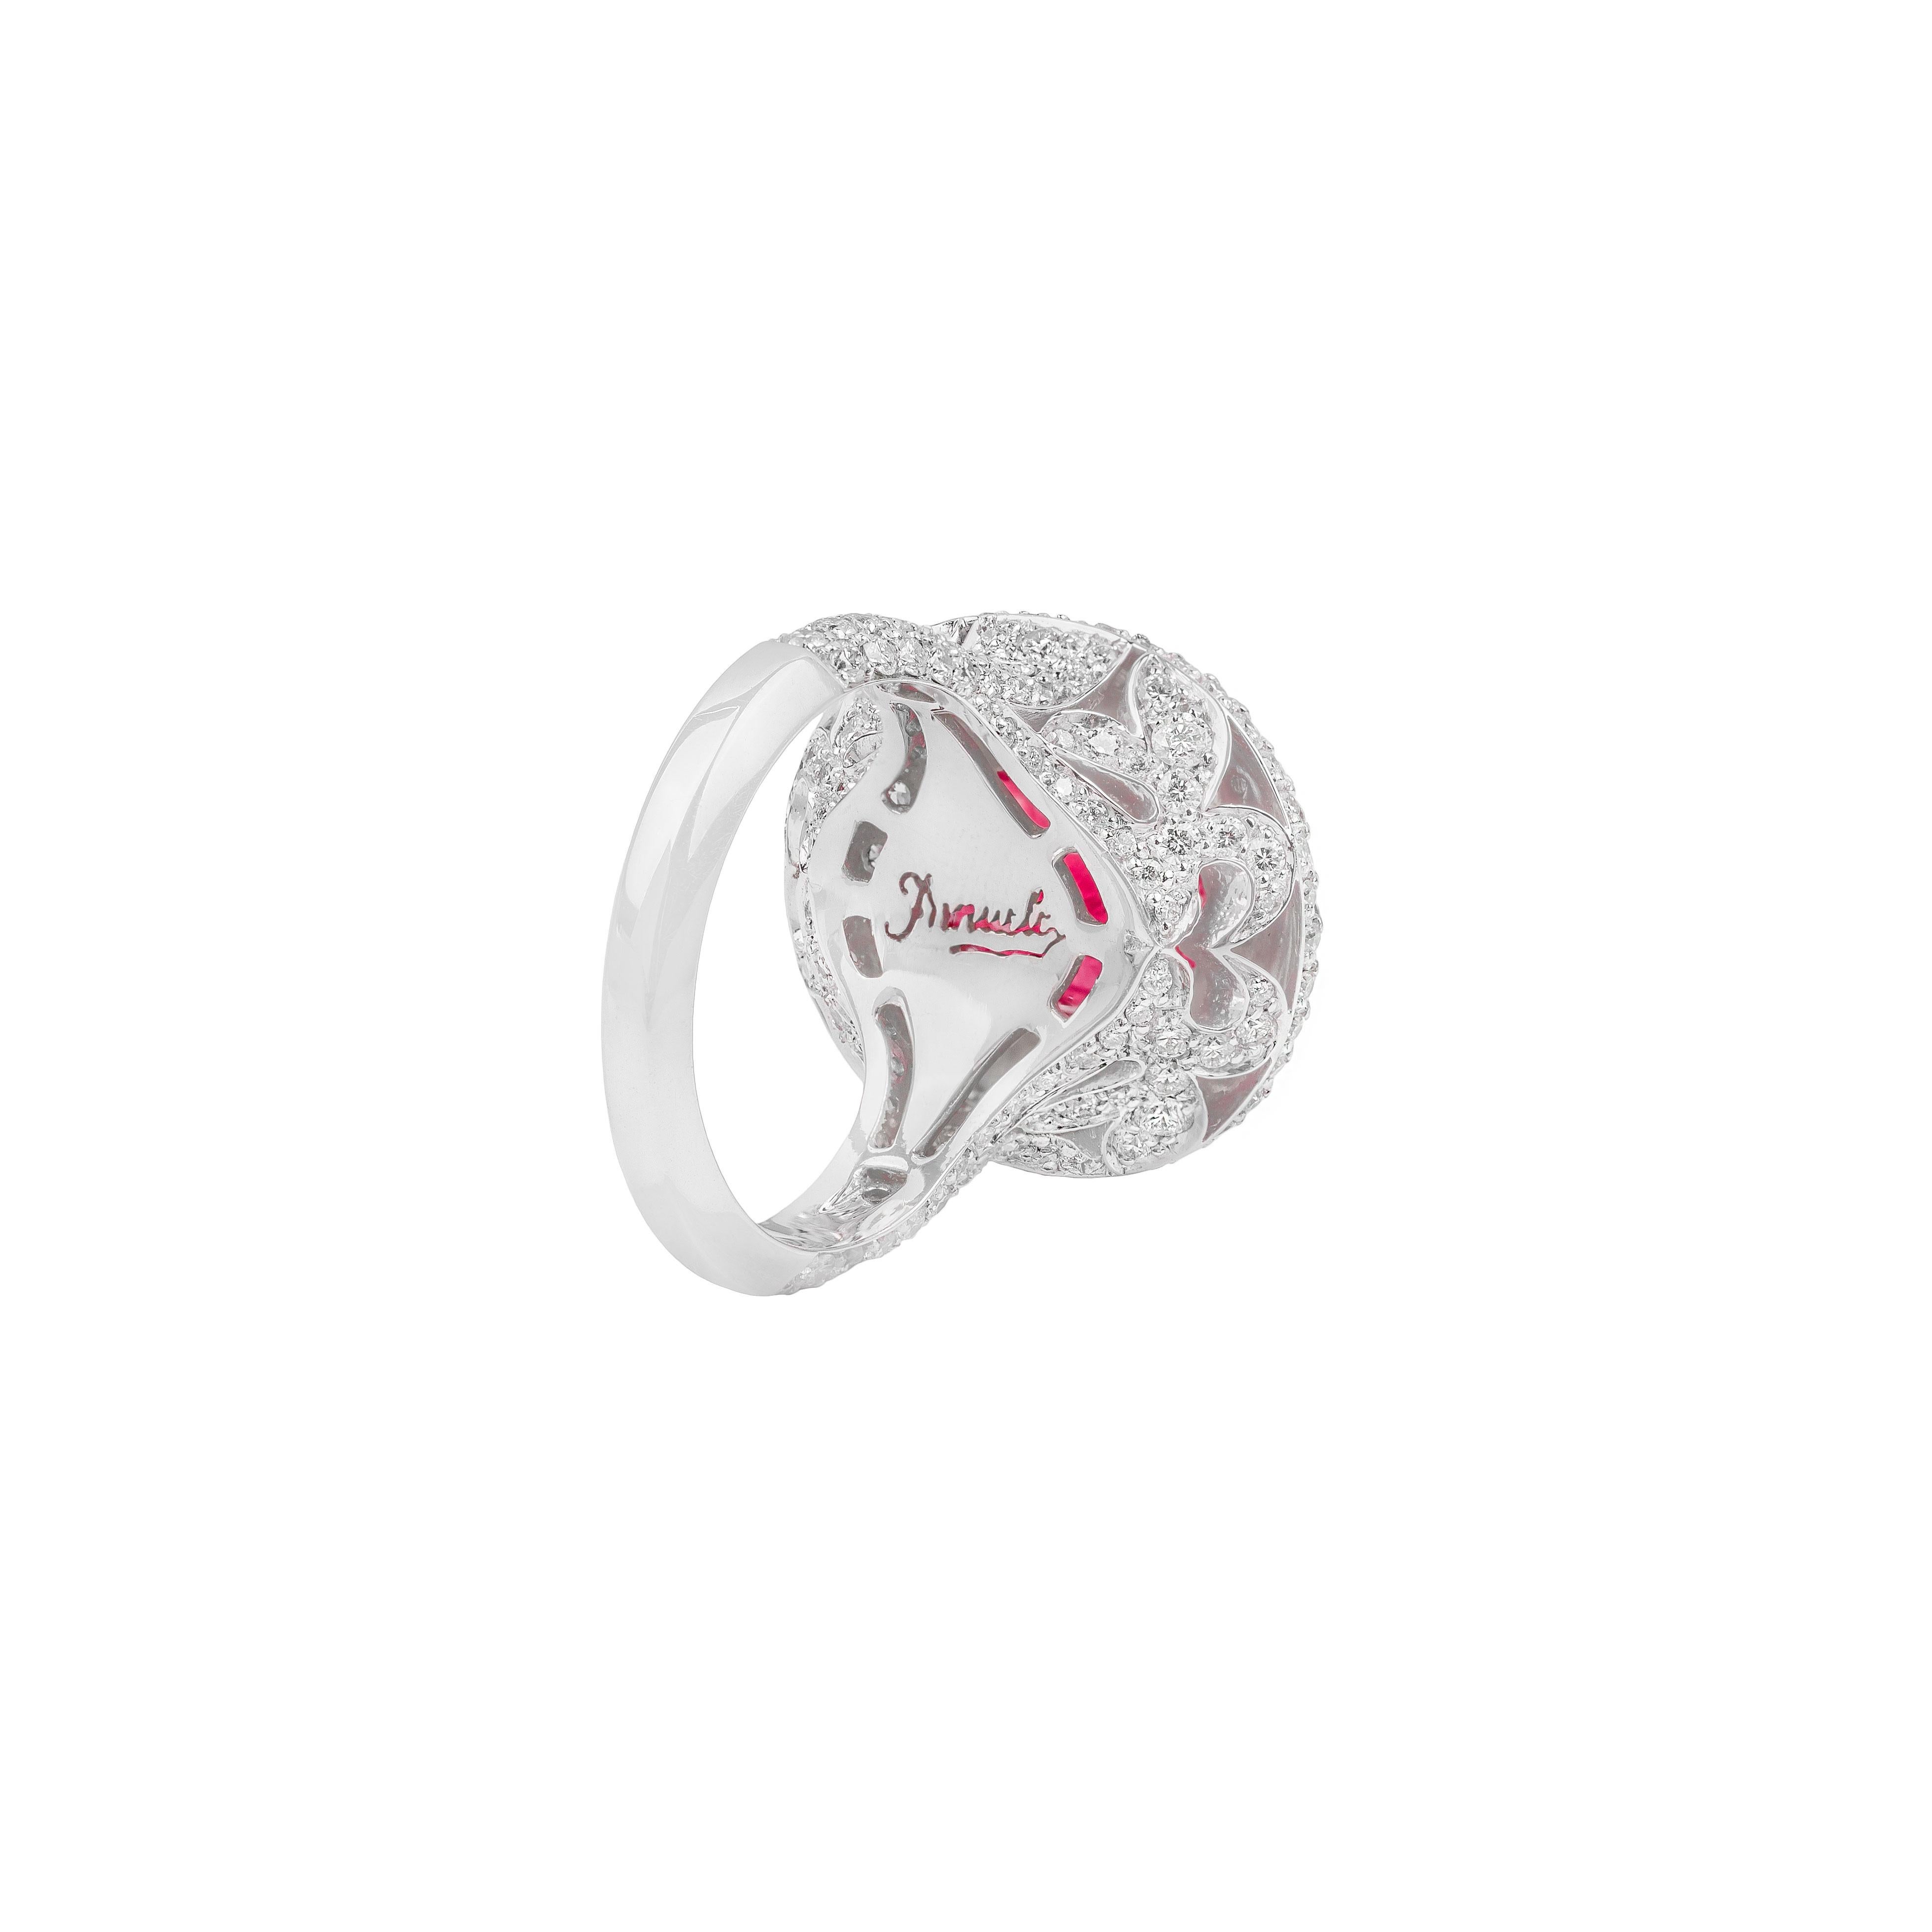 For Sale:  18k White Gold, Ruby and White Diamonds Ring IGN Certificate 4